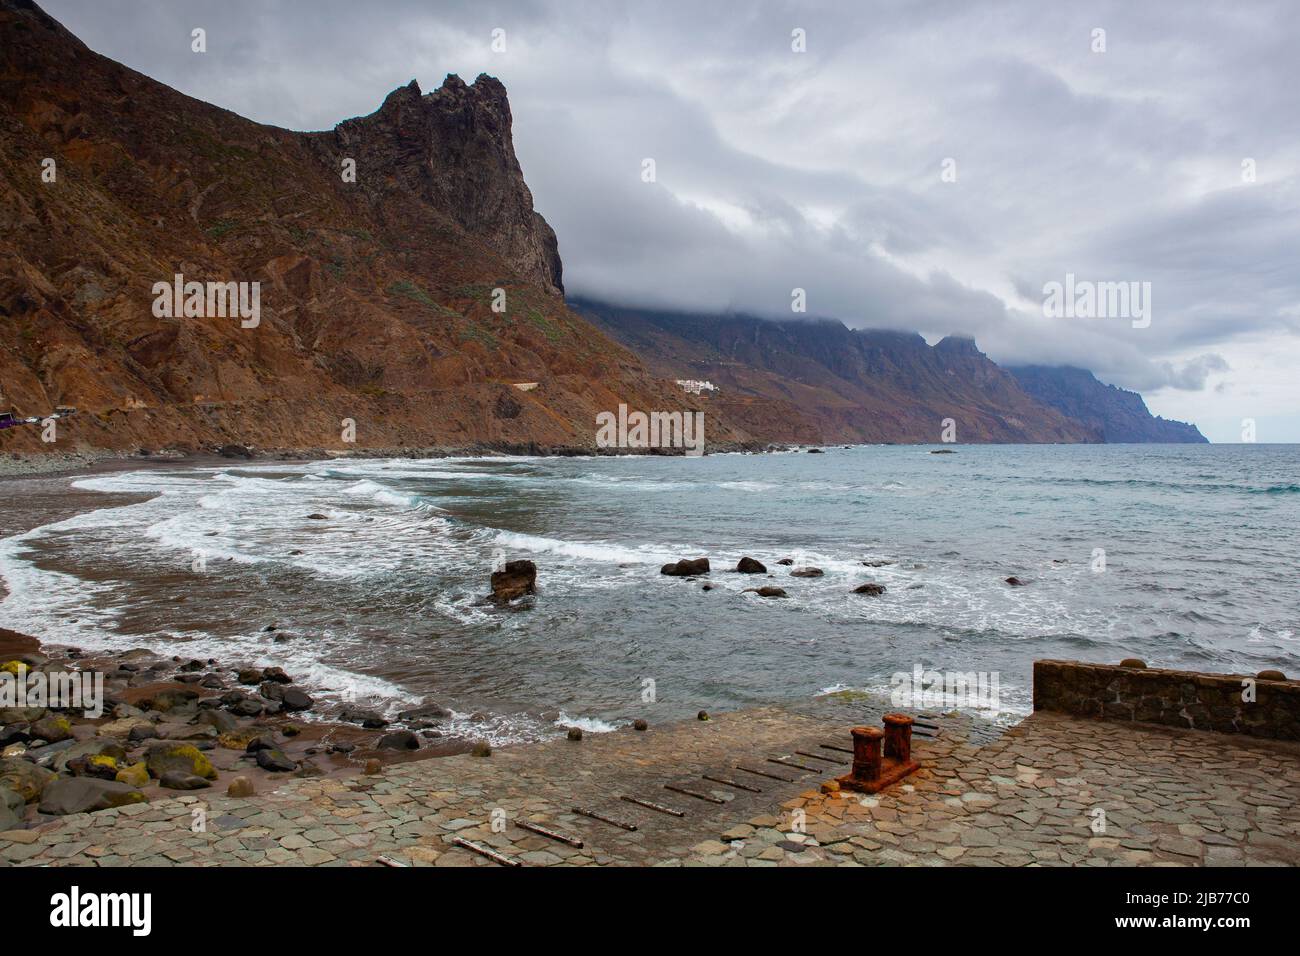 Dramatic coast in Rural de Anaga Park, Tenerife, Spain. Anaga Country Park covers much of the mountain range located on the north-west of the Island. Stock Photo